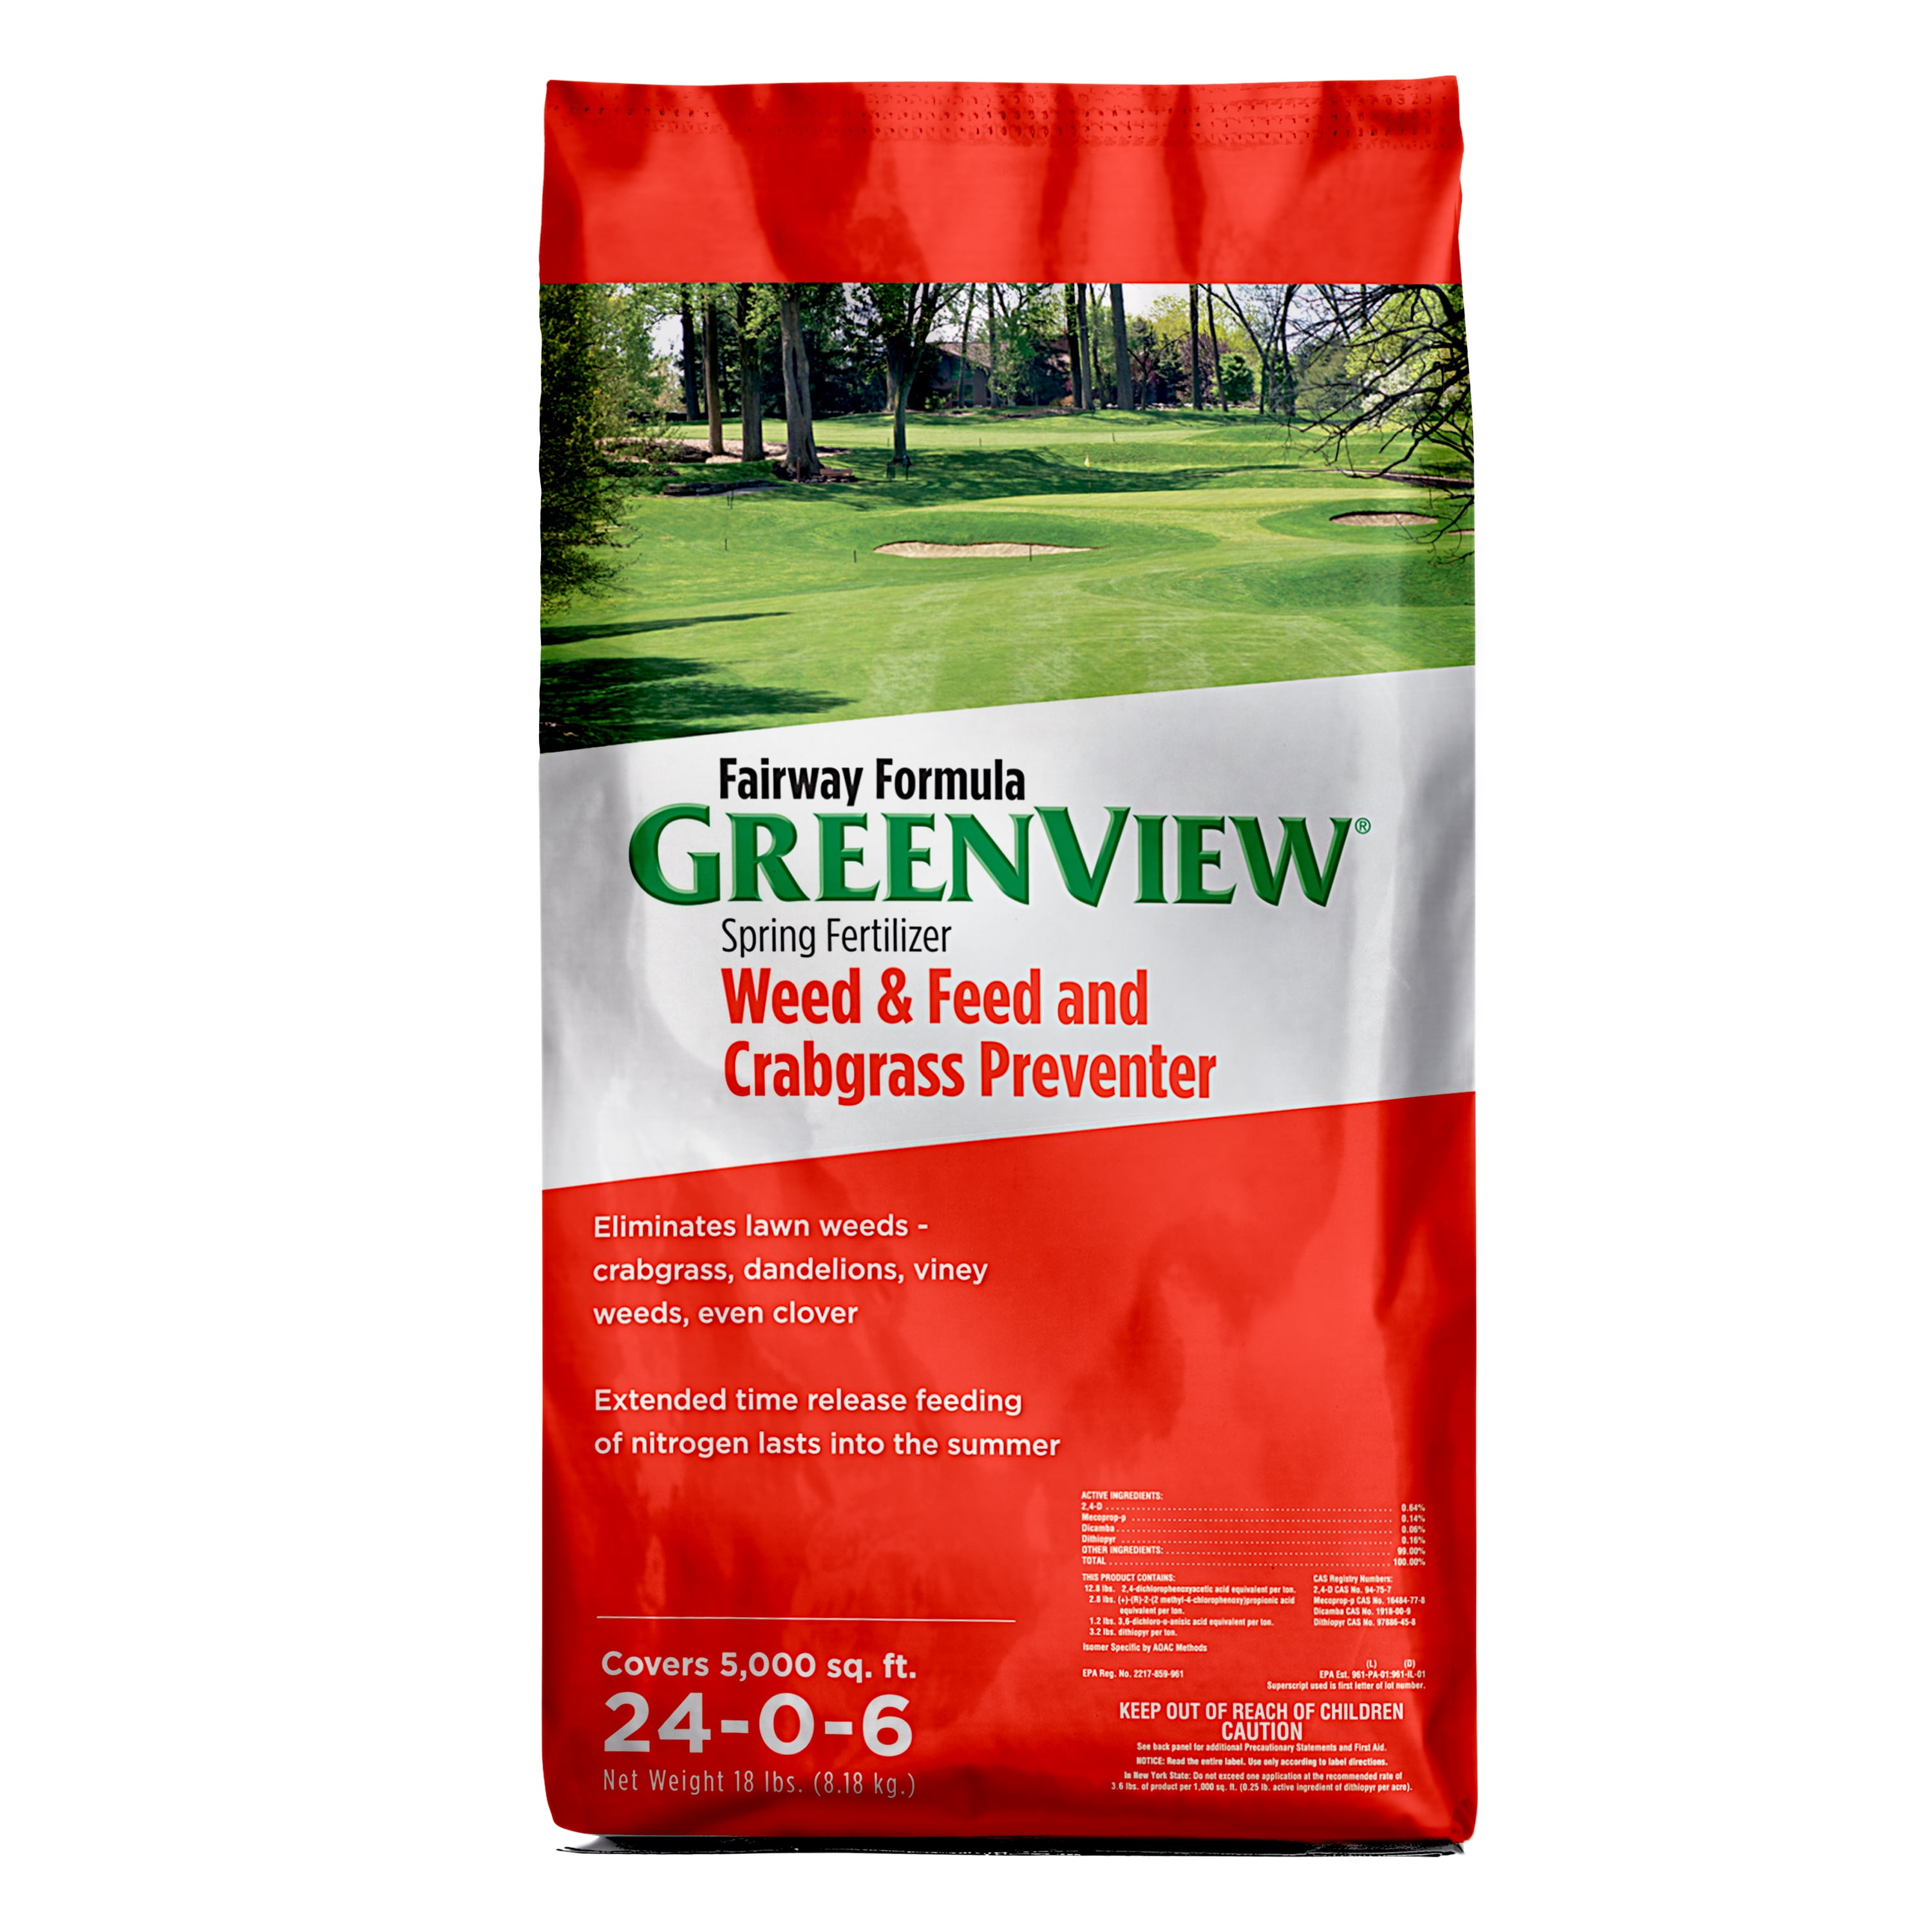 Image of GreenView Lawn Fertilizer product